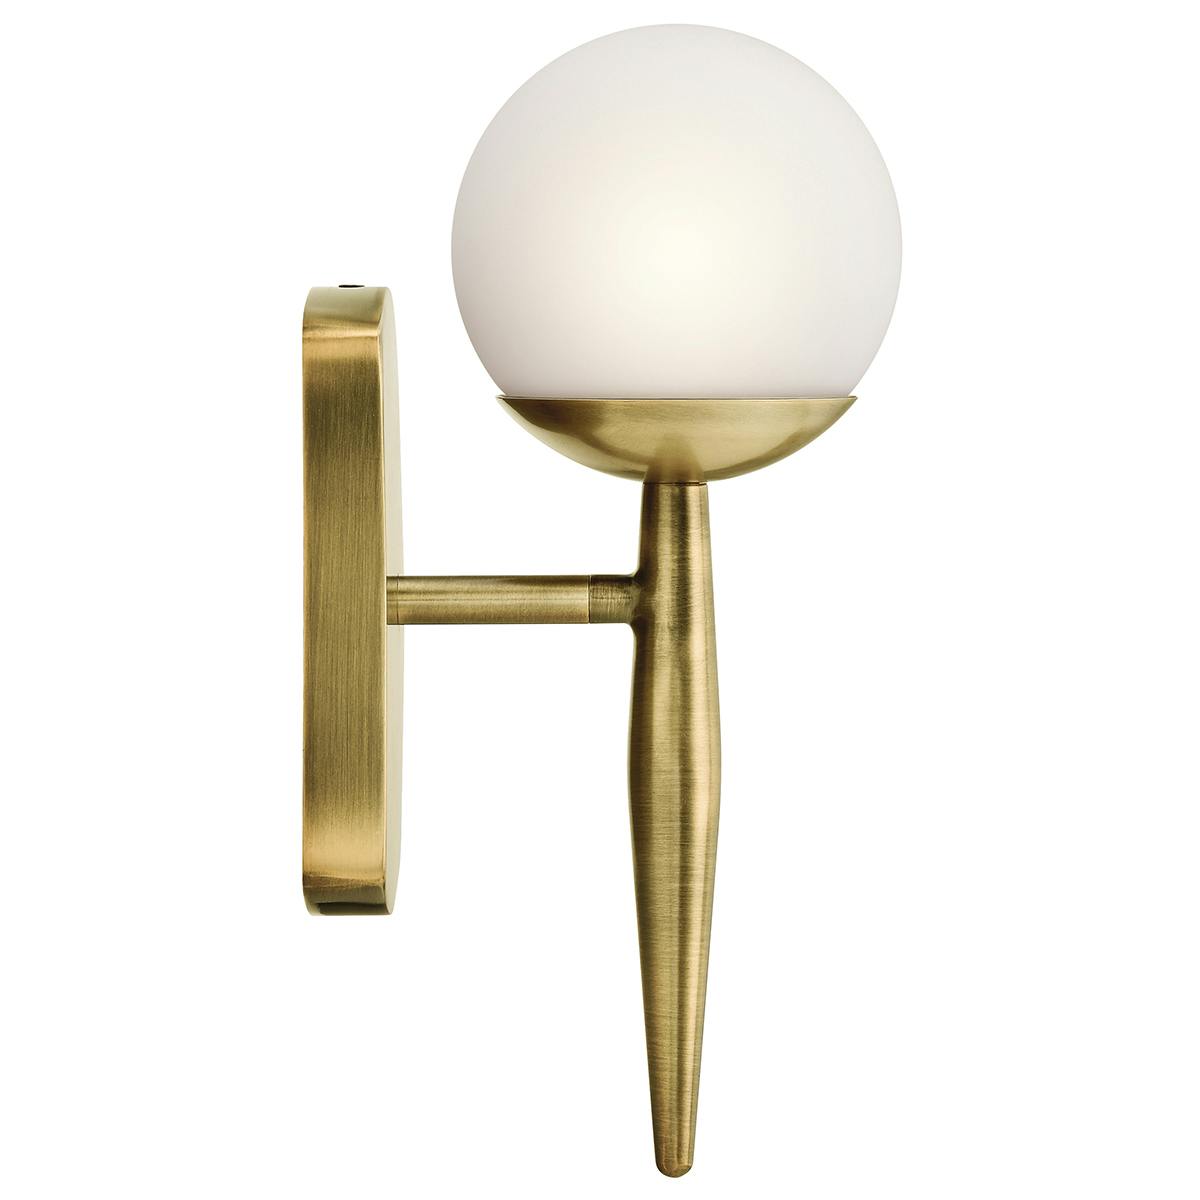 Profile view of the Jasper 11.5" 1 Light Halogen Sconce Brass on a white background